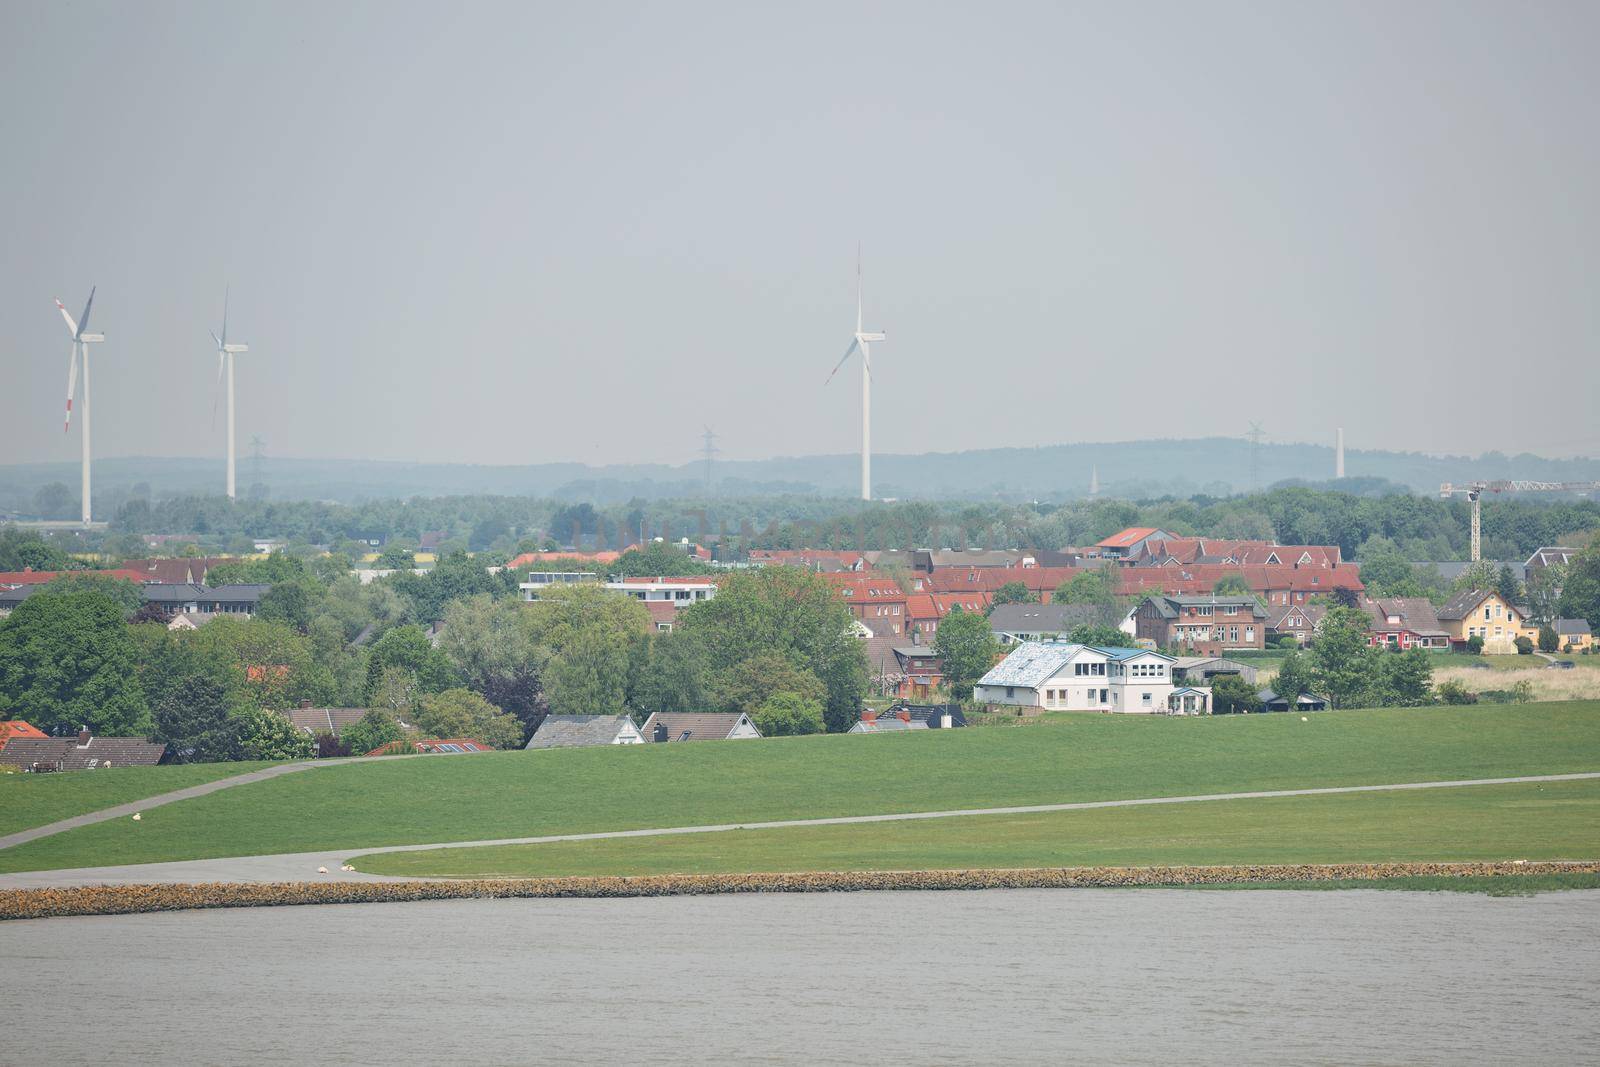 Windmills power plant and turbines generating renewable green energy near to Kiel canal in Germany.